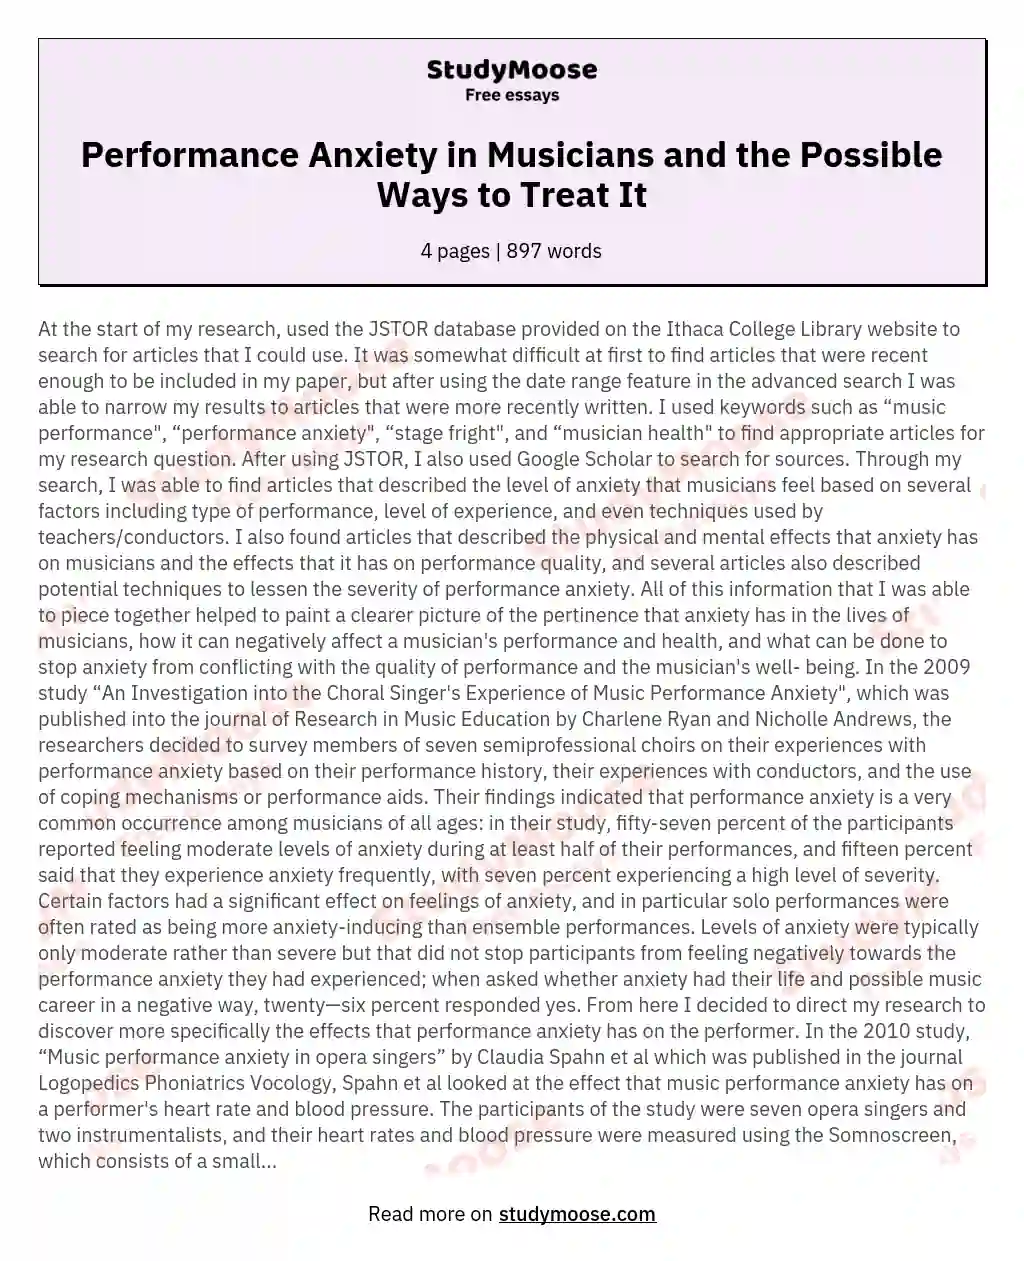 Performance Anxiety in Musicians and the Possible Ways to Treat It essay